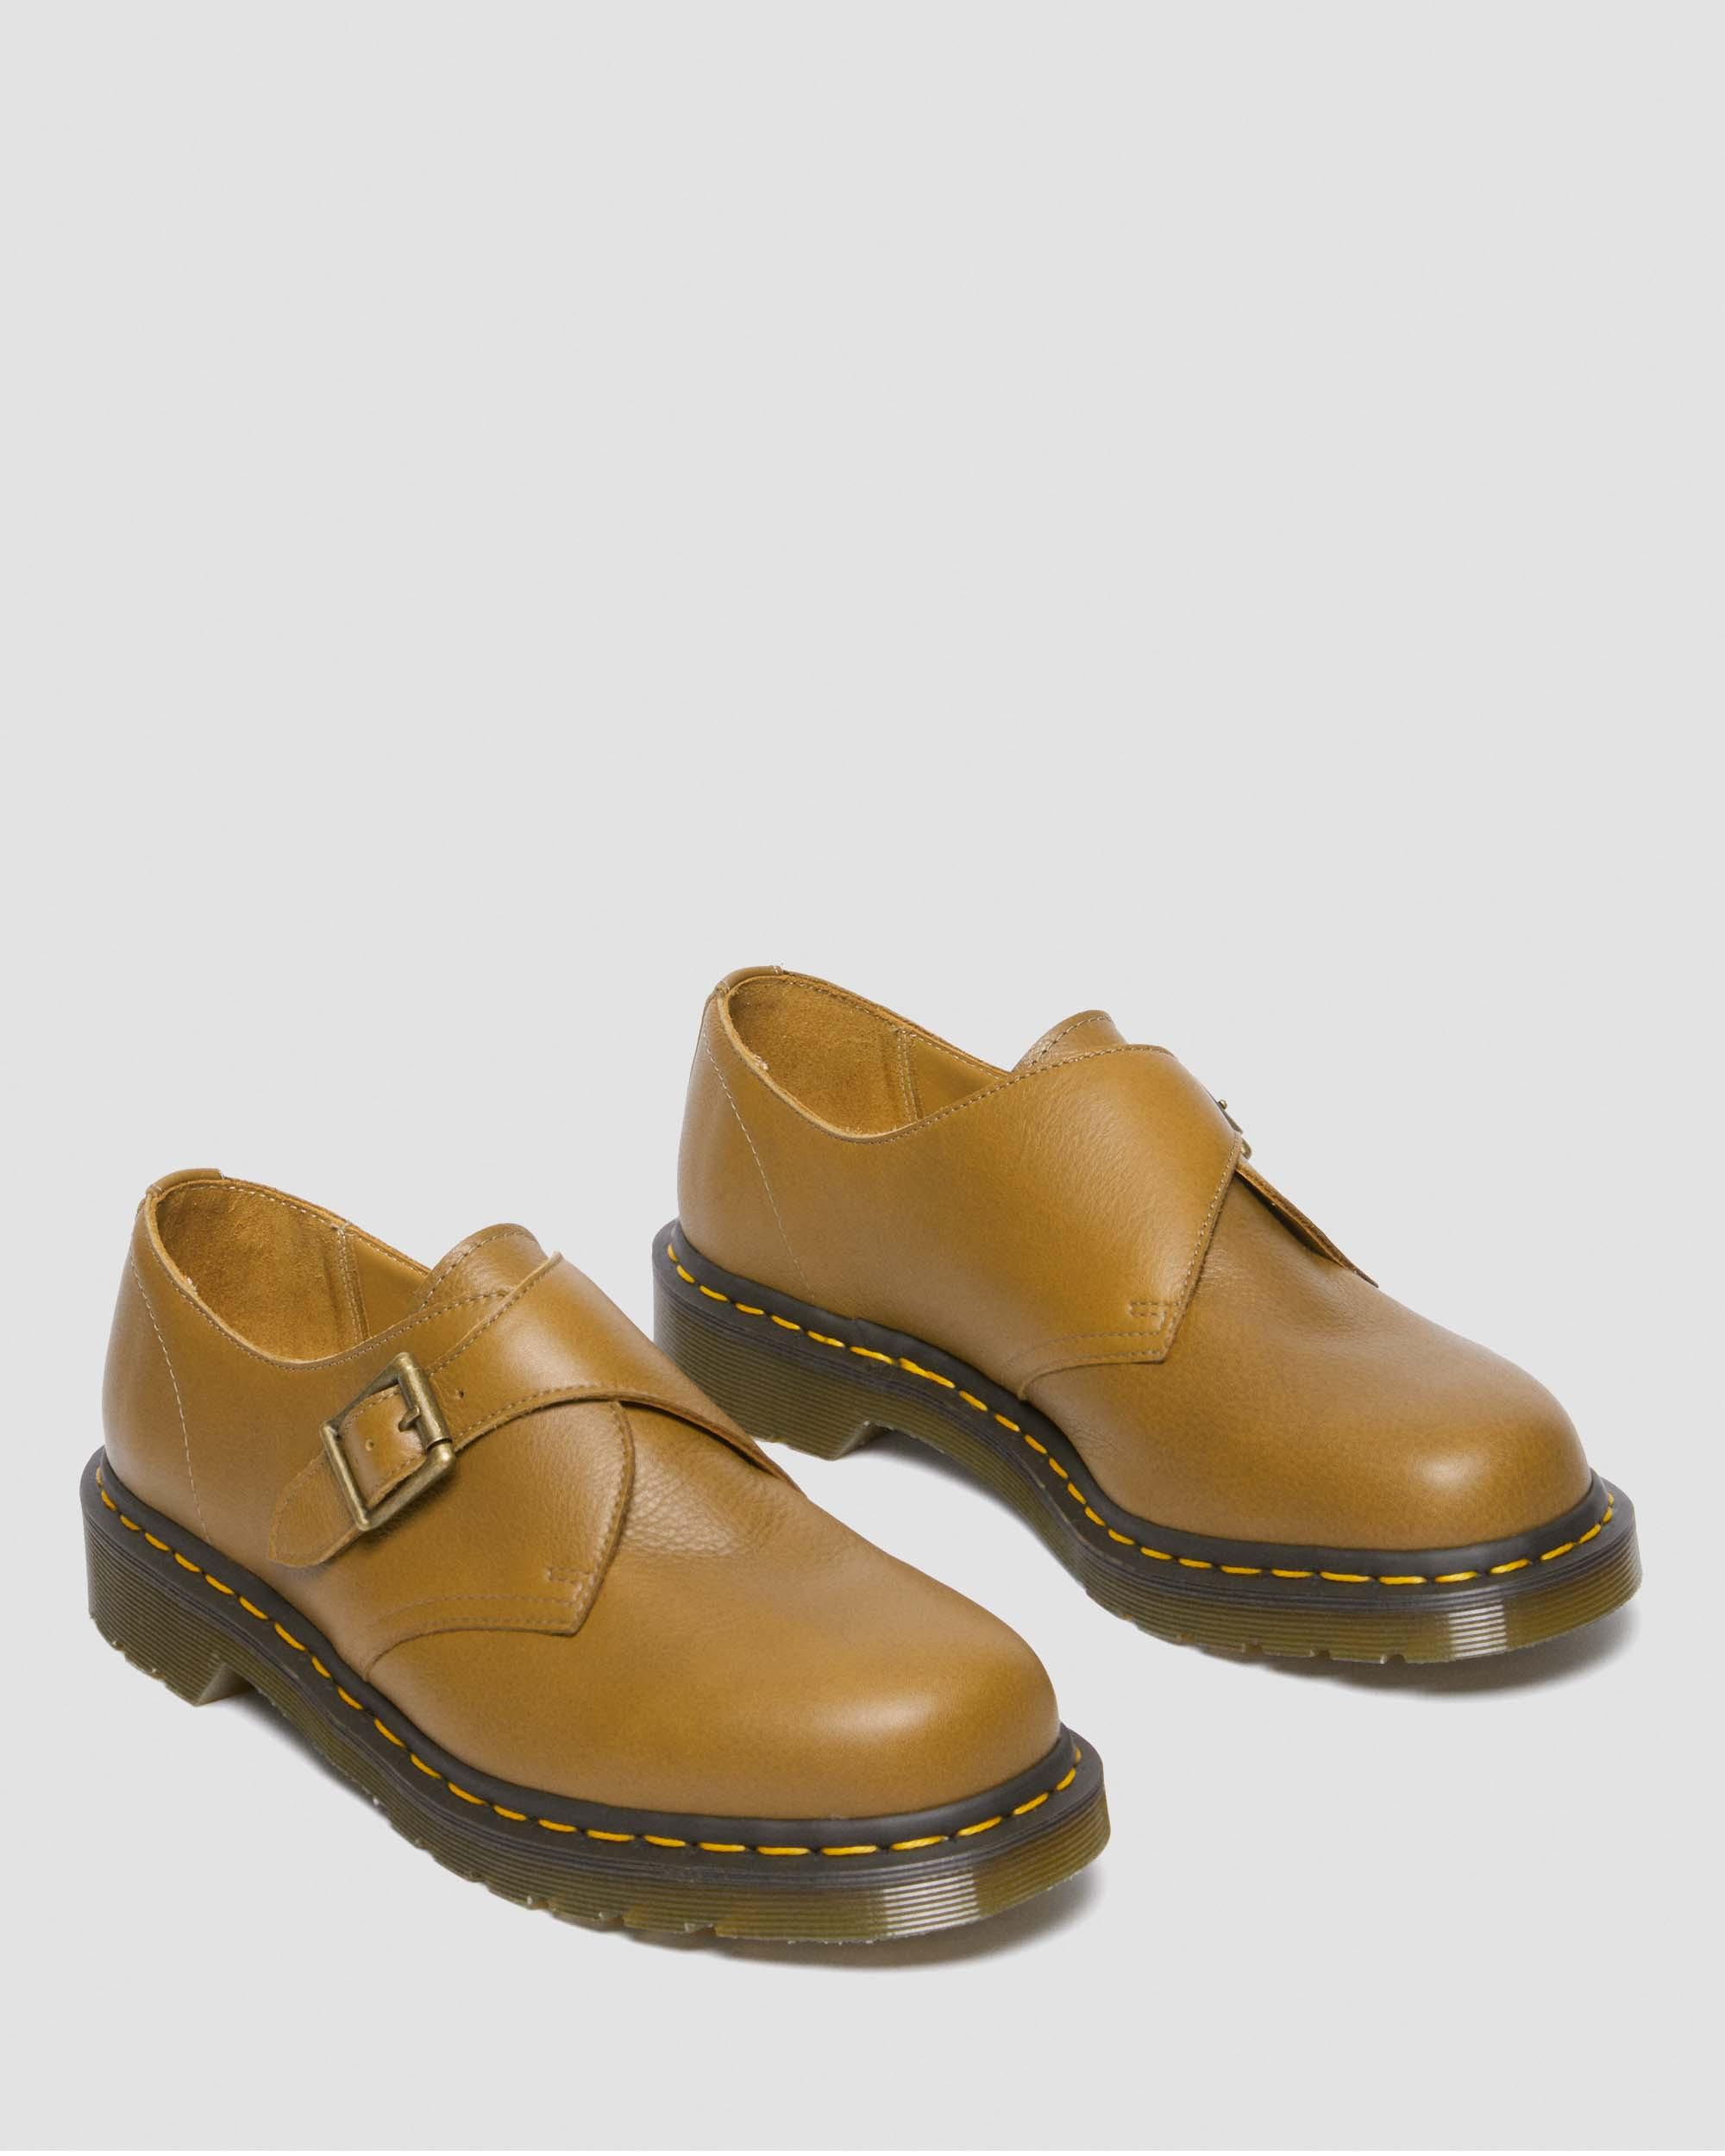 1461 Monk Buckle Leather Shoes in Dark Tan